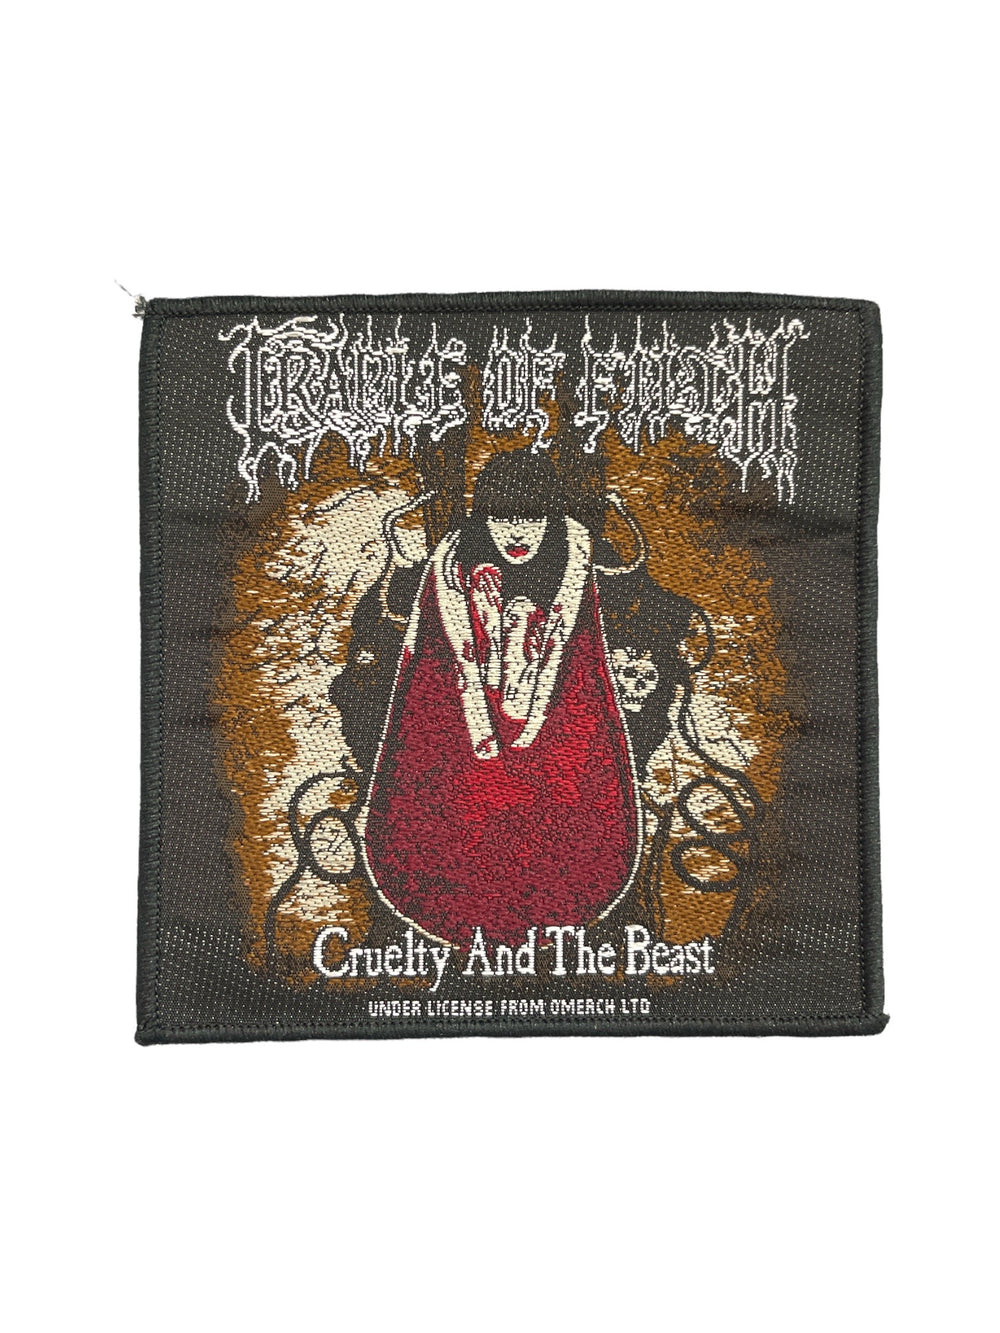 Cradle Of Filth Cruelty & The Beast Official Woven Patch Brand New